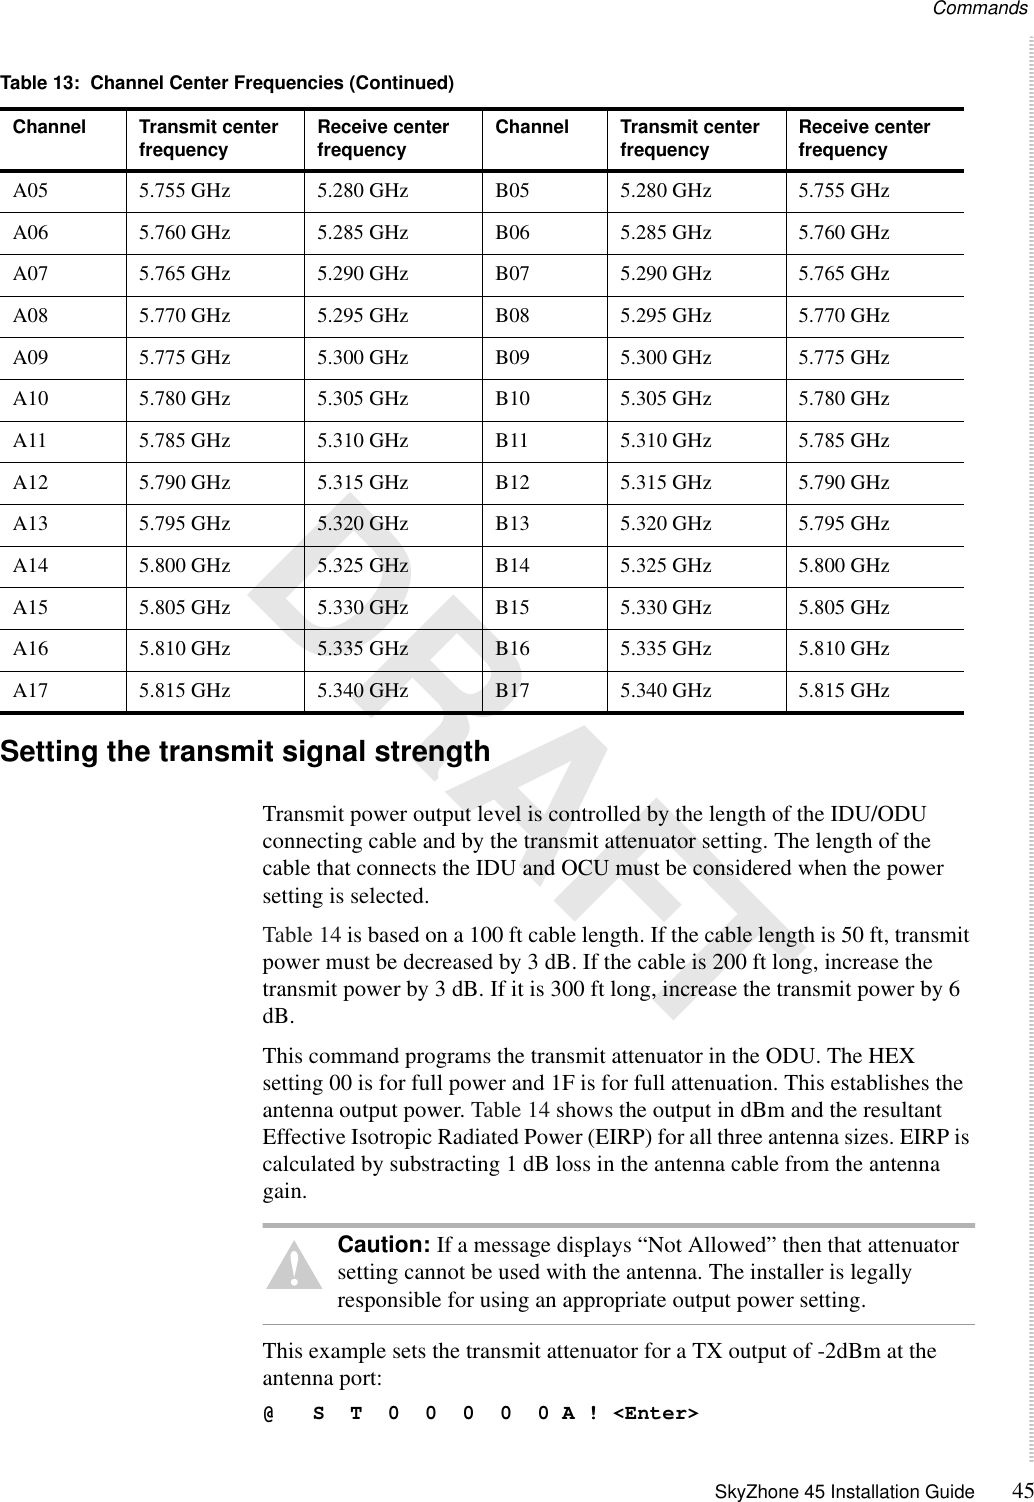 Commands SkyZhone 45 Installation Guide 45 DRAFTSetting the transmit signal strengthTransmit power output level is controlled by the length of the IDU/ODU connecting cable and by the transmit attenuator setting. The length of the cable that connects the IDU and OCU must be considered when the power setting is selected.Table 14 is based on a 100 ft cable length. If the cable length is 50 ft, transmit power must be decreased by 3 dB. If the cable is 200 ft long, increase the transmit power by 3 dB. If it is 300 ft long, increase the transmit power by 6 dB.This command programs the transmit attenuator in the ODU. The HEX setting 00 is for full power and 1F is for full attenuation. This establishes the antenna output power. Table 14 shows the output in dBm and the resultant Effective Isotropic Radiated Power (EIRP) for all three antenna sizes. EIRP is calculated by substracting 1 dB loss in the antenna cable from the antenna gain. Caution: If a message displays “Not Allowed” then that attenuator setting cannot be used with the antenna. The installer is legally responsible for using an appropriate output power setting. This example sets the transmit attenuator for a TX output of -2dBm at the antenna port:@   S  T  0  0  0  0  0 A ! &lt;Enter&gt;A05 5.755 GHz 5.280 GHz B05 5.280 GHz 5.755 GHzA06 5.760 GHz 5.285 GHz B06 5.285 GHz 5.760 GHzA07 5.765 GHz 5.290 GHz B07 5.290 GHz 5.765 GHzA08 5.770 GHz 5.295 GHz B08 5.295 GHz 5.770 GHzA09 5.775 GHz 5.300 GHz B09 5.300 GHz 5.775 GHzA10 5.780 GHz 5.305 GHz B10 5.305 GHz 5.780 GHzA11 5.785 GHz 5.310 GHz B11 5.310 GHz 5.785 GHzA12 5.790 GHz 5.315 GHz B12 5.315 GHz 5.790 GHzA13 5.795 GHz 5.320 GHz B13 5.320 GHz 5.795 GHzA14 5.800 GHz 5.325 GHz B14 5.325 GHz 5.800 GHzA15 5.805 GHz 5.330 GHz B15 5.330 GHz 5.805 GHzA16 5.810 GHz 5.335 GHz B16 5.335 GHz 5.810 GHzA17 5.815 GHz 5.340 GHz B17 5.340 GHz 5.815 GHzTable 13:  Channel Center Frequencies (Continued)Channel Transmit center frequency Receive center frequency Channel Transmit center frequency Receive center frequency